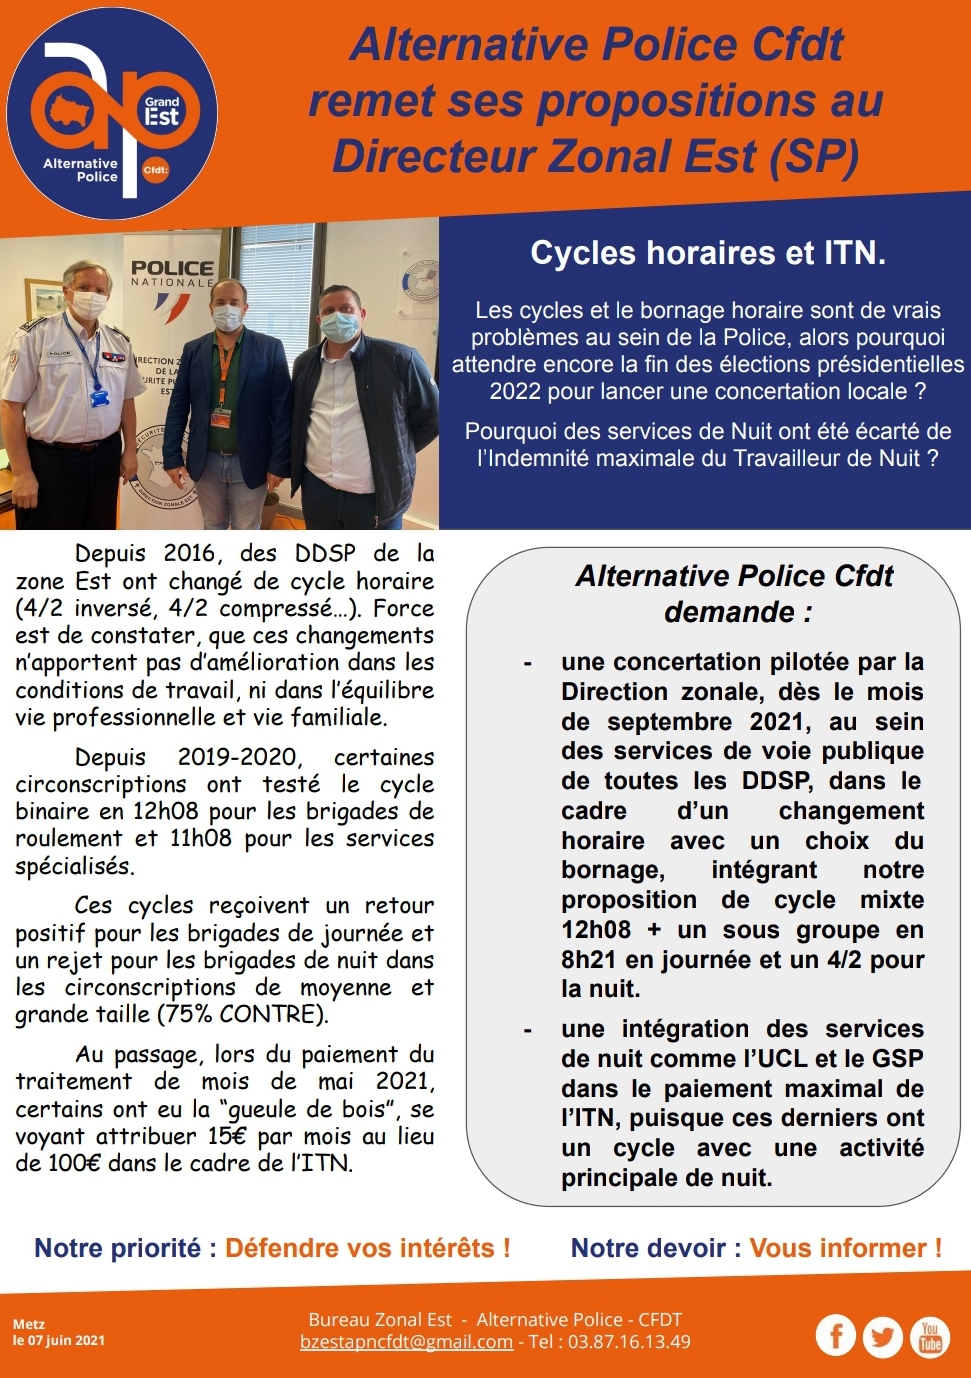 Cycles horaires et ITN.